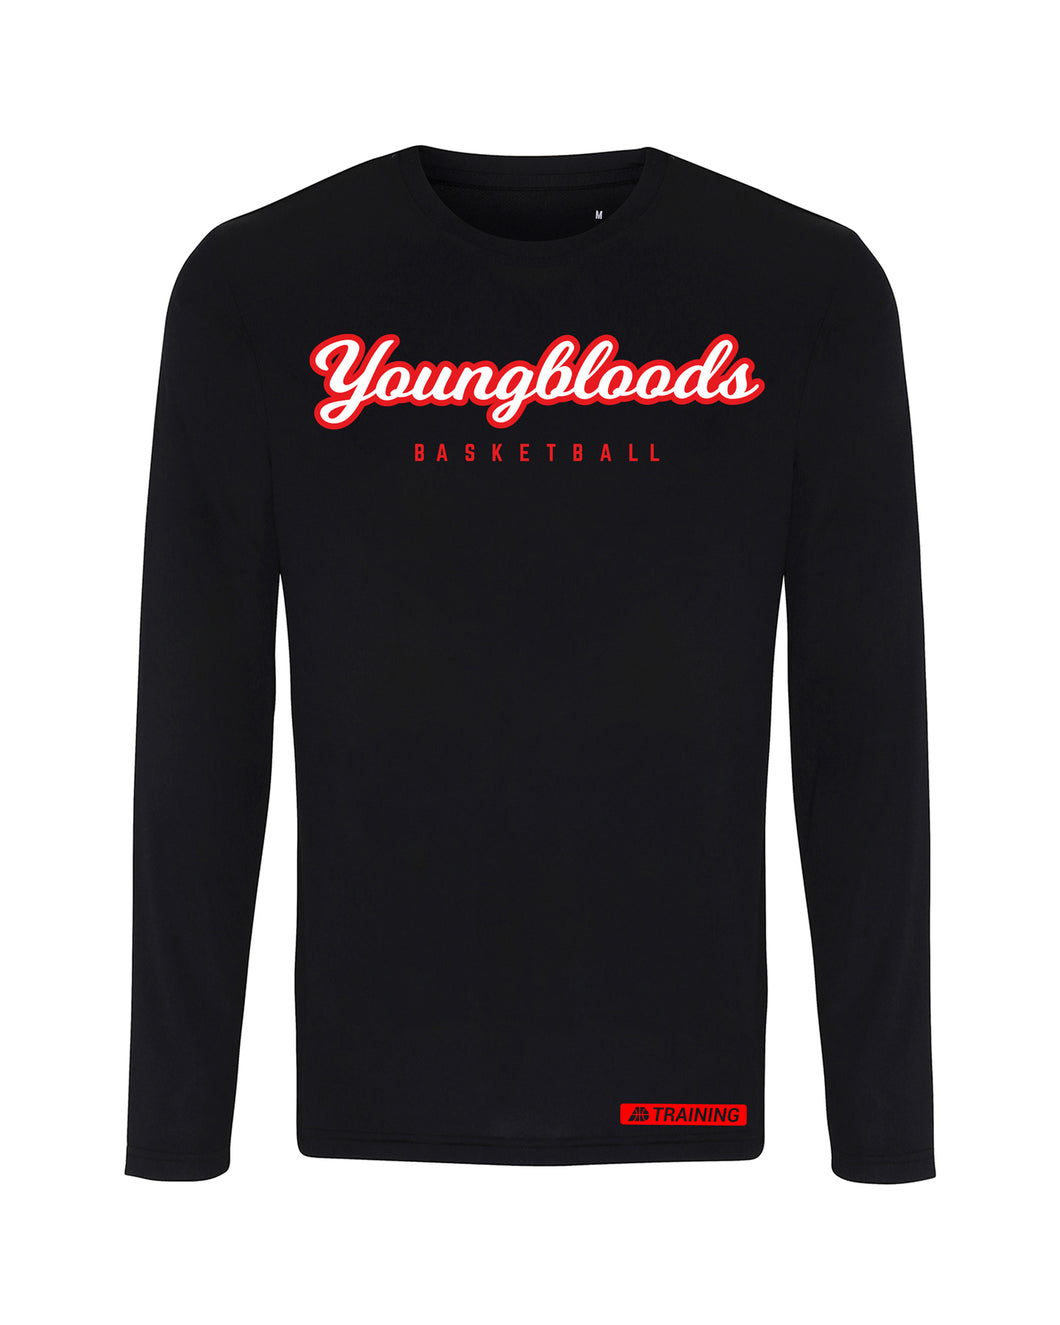 Youngbloods Basketball 23/24 Long Sleeve Performance T-Shirt